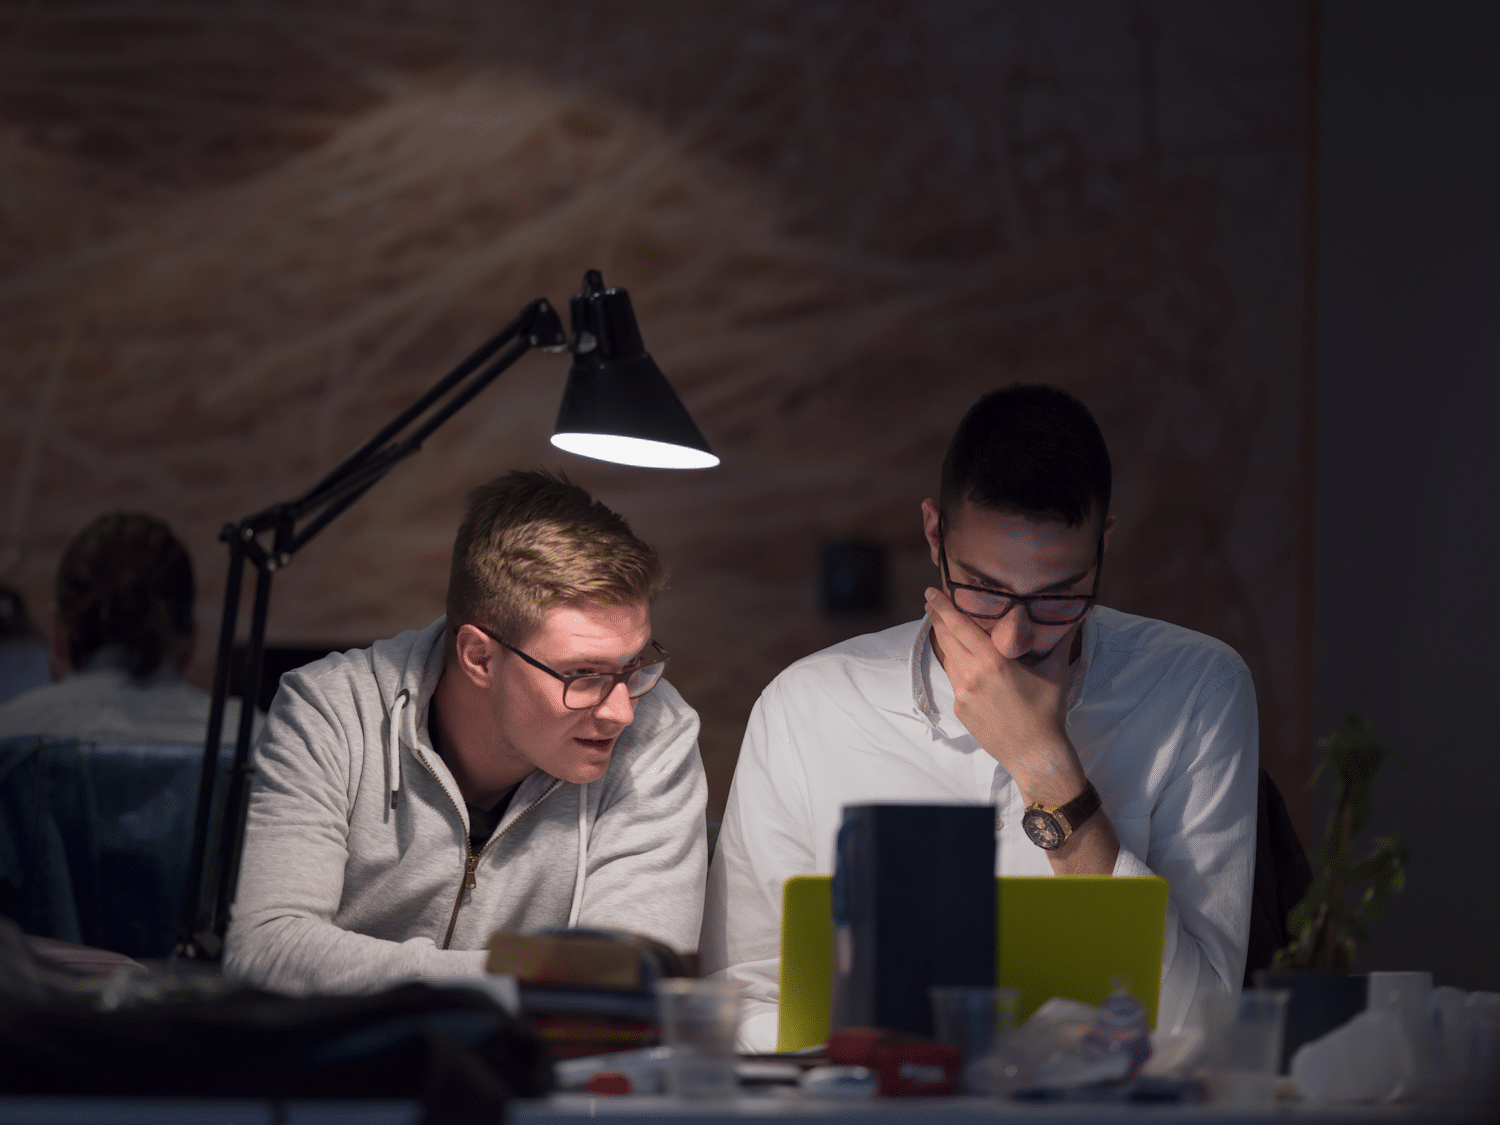 designers-in-the-night-startup-office